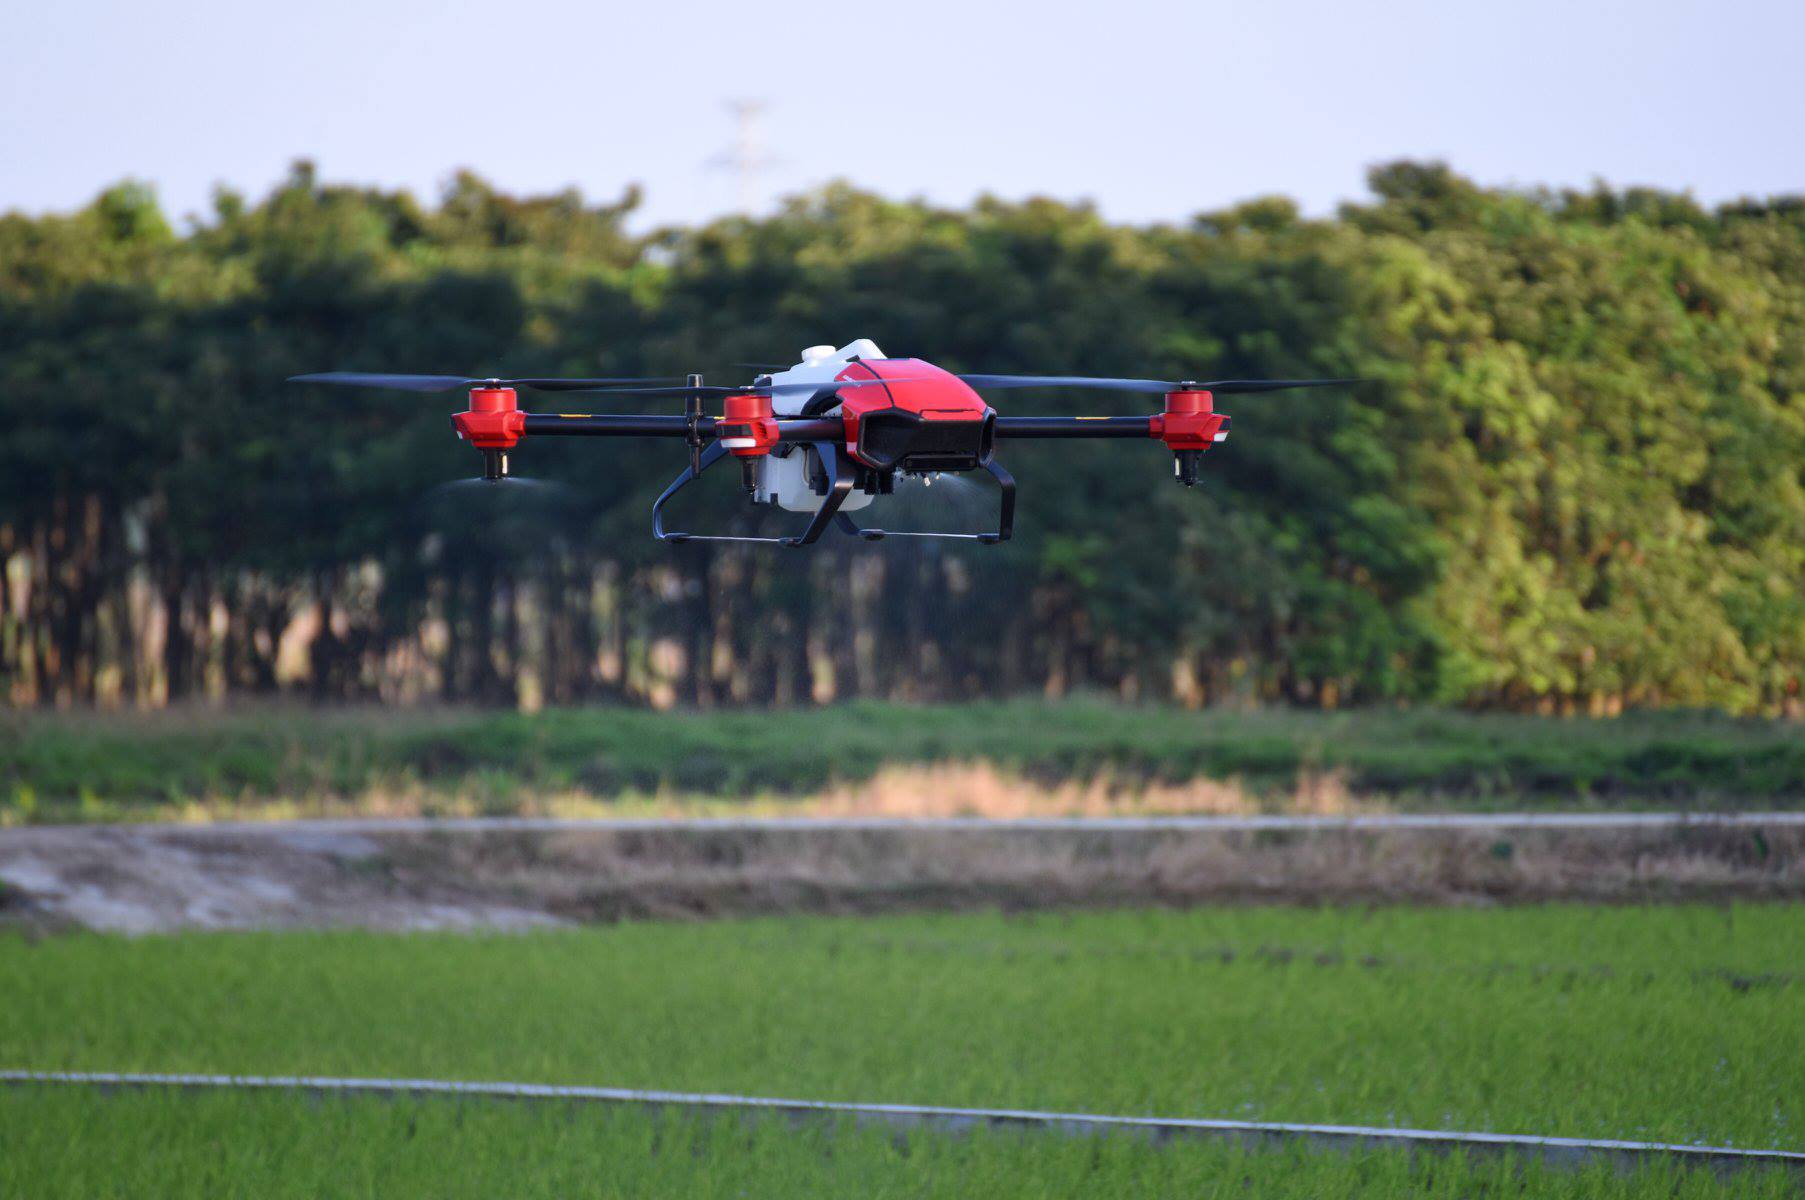 P30 aerial drone spraying crops